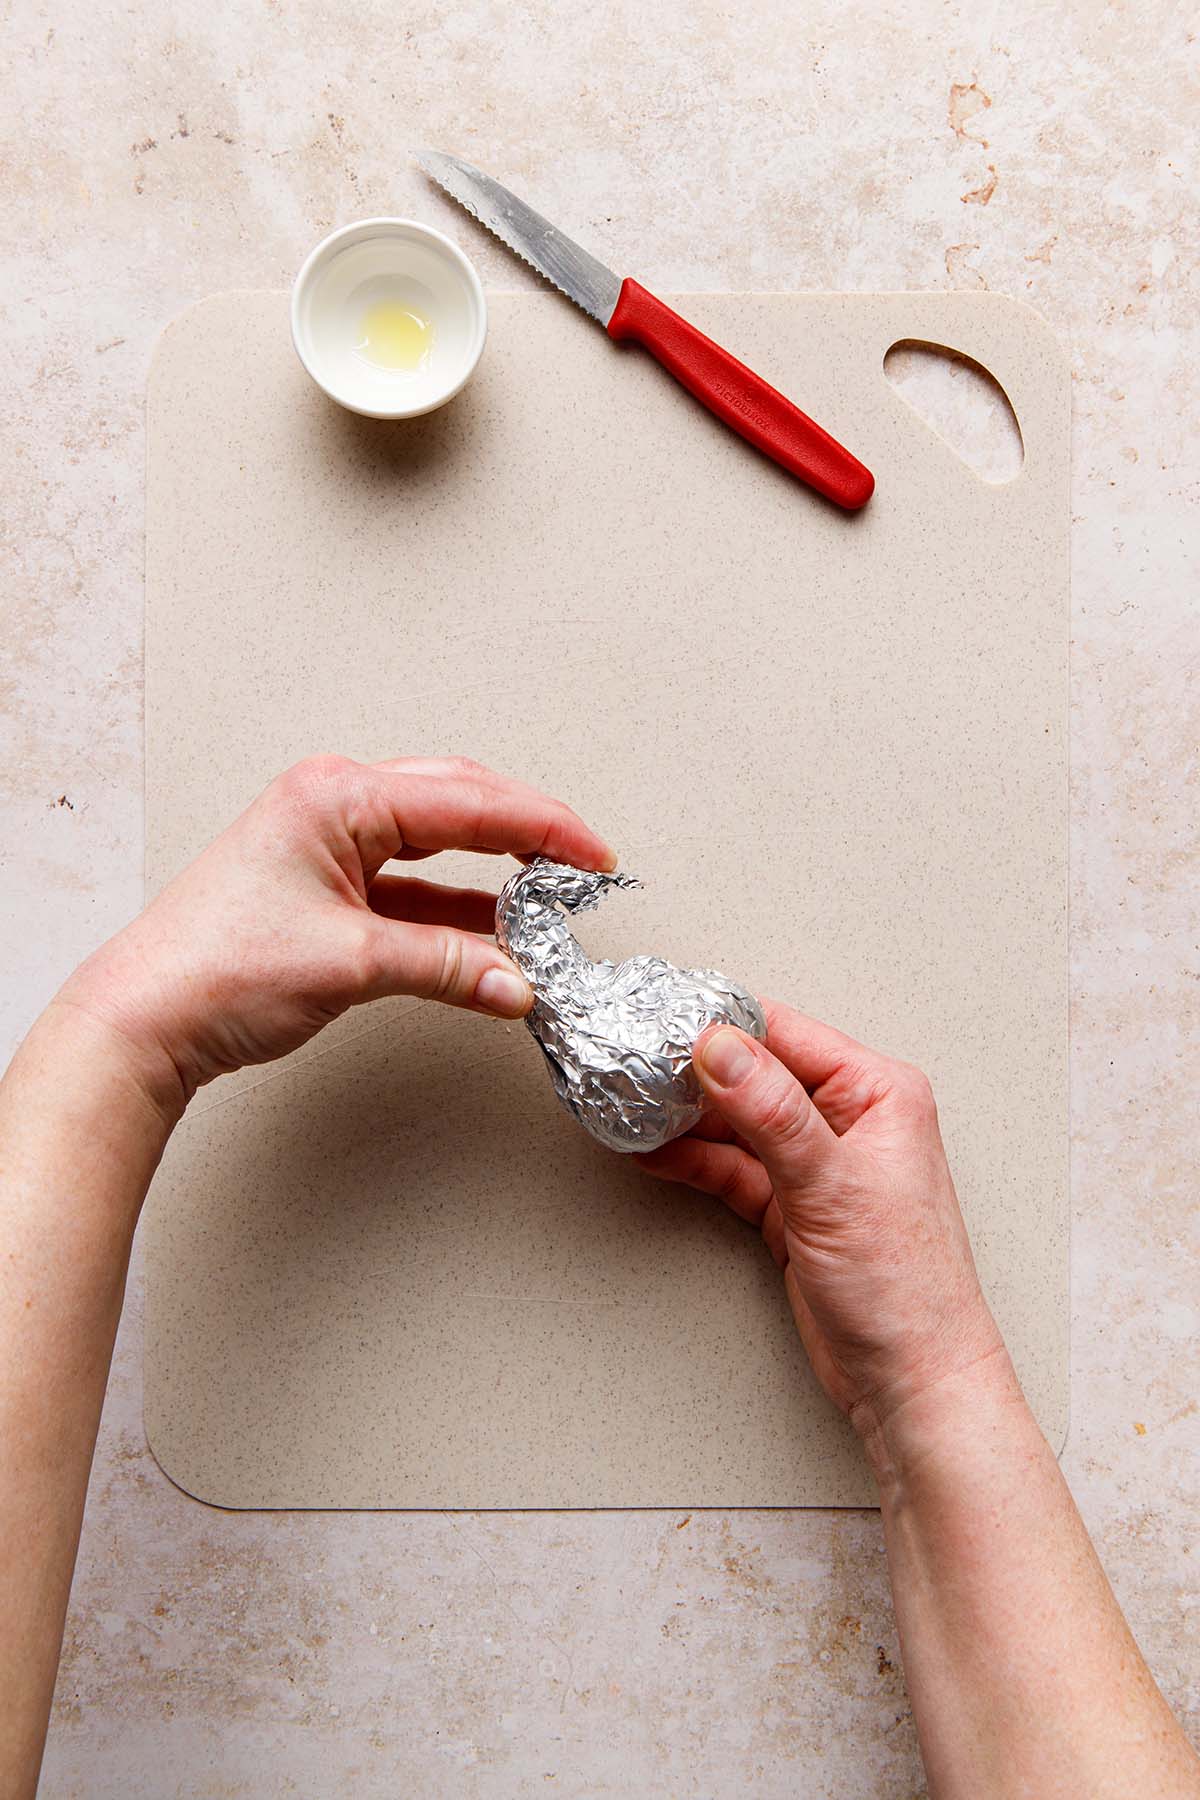 Hands wrapping a whole bulb of garlic in foil.